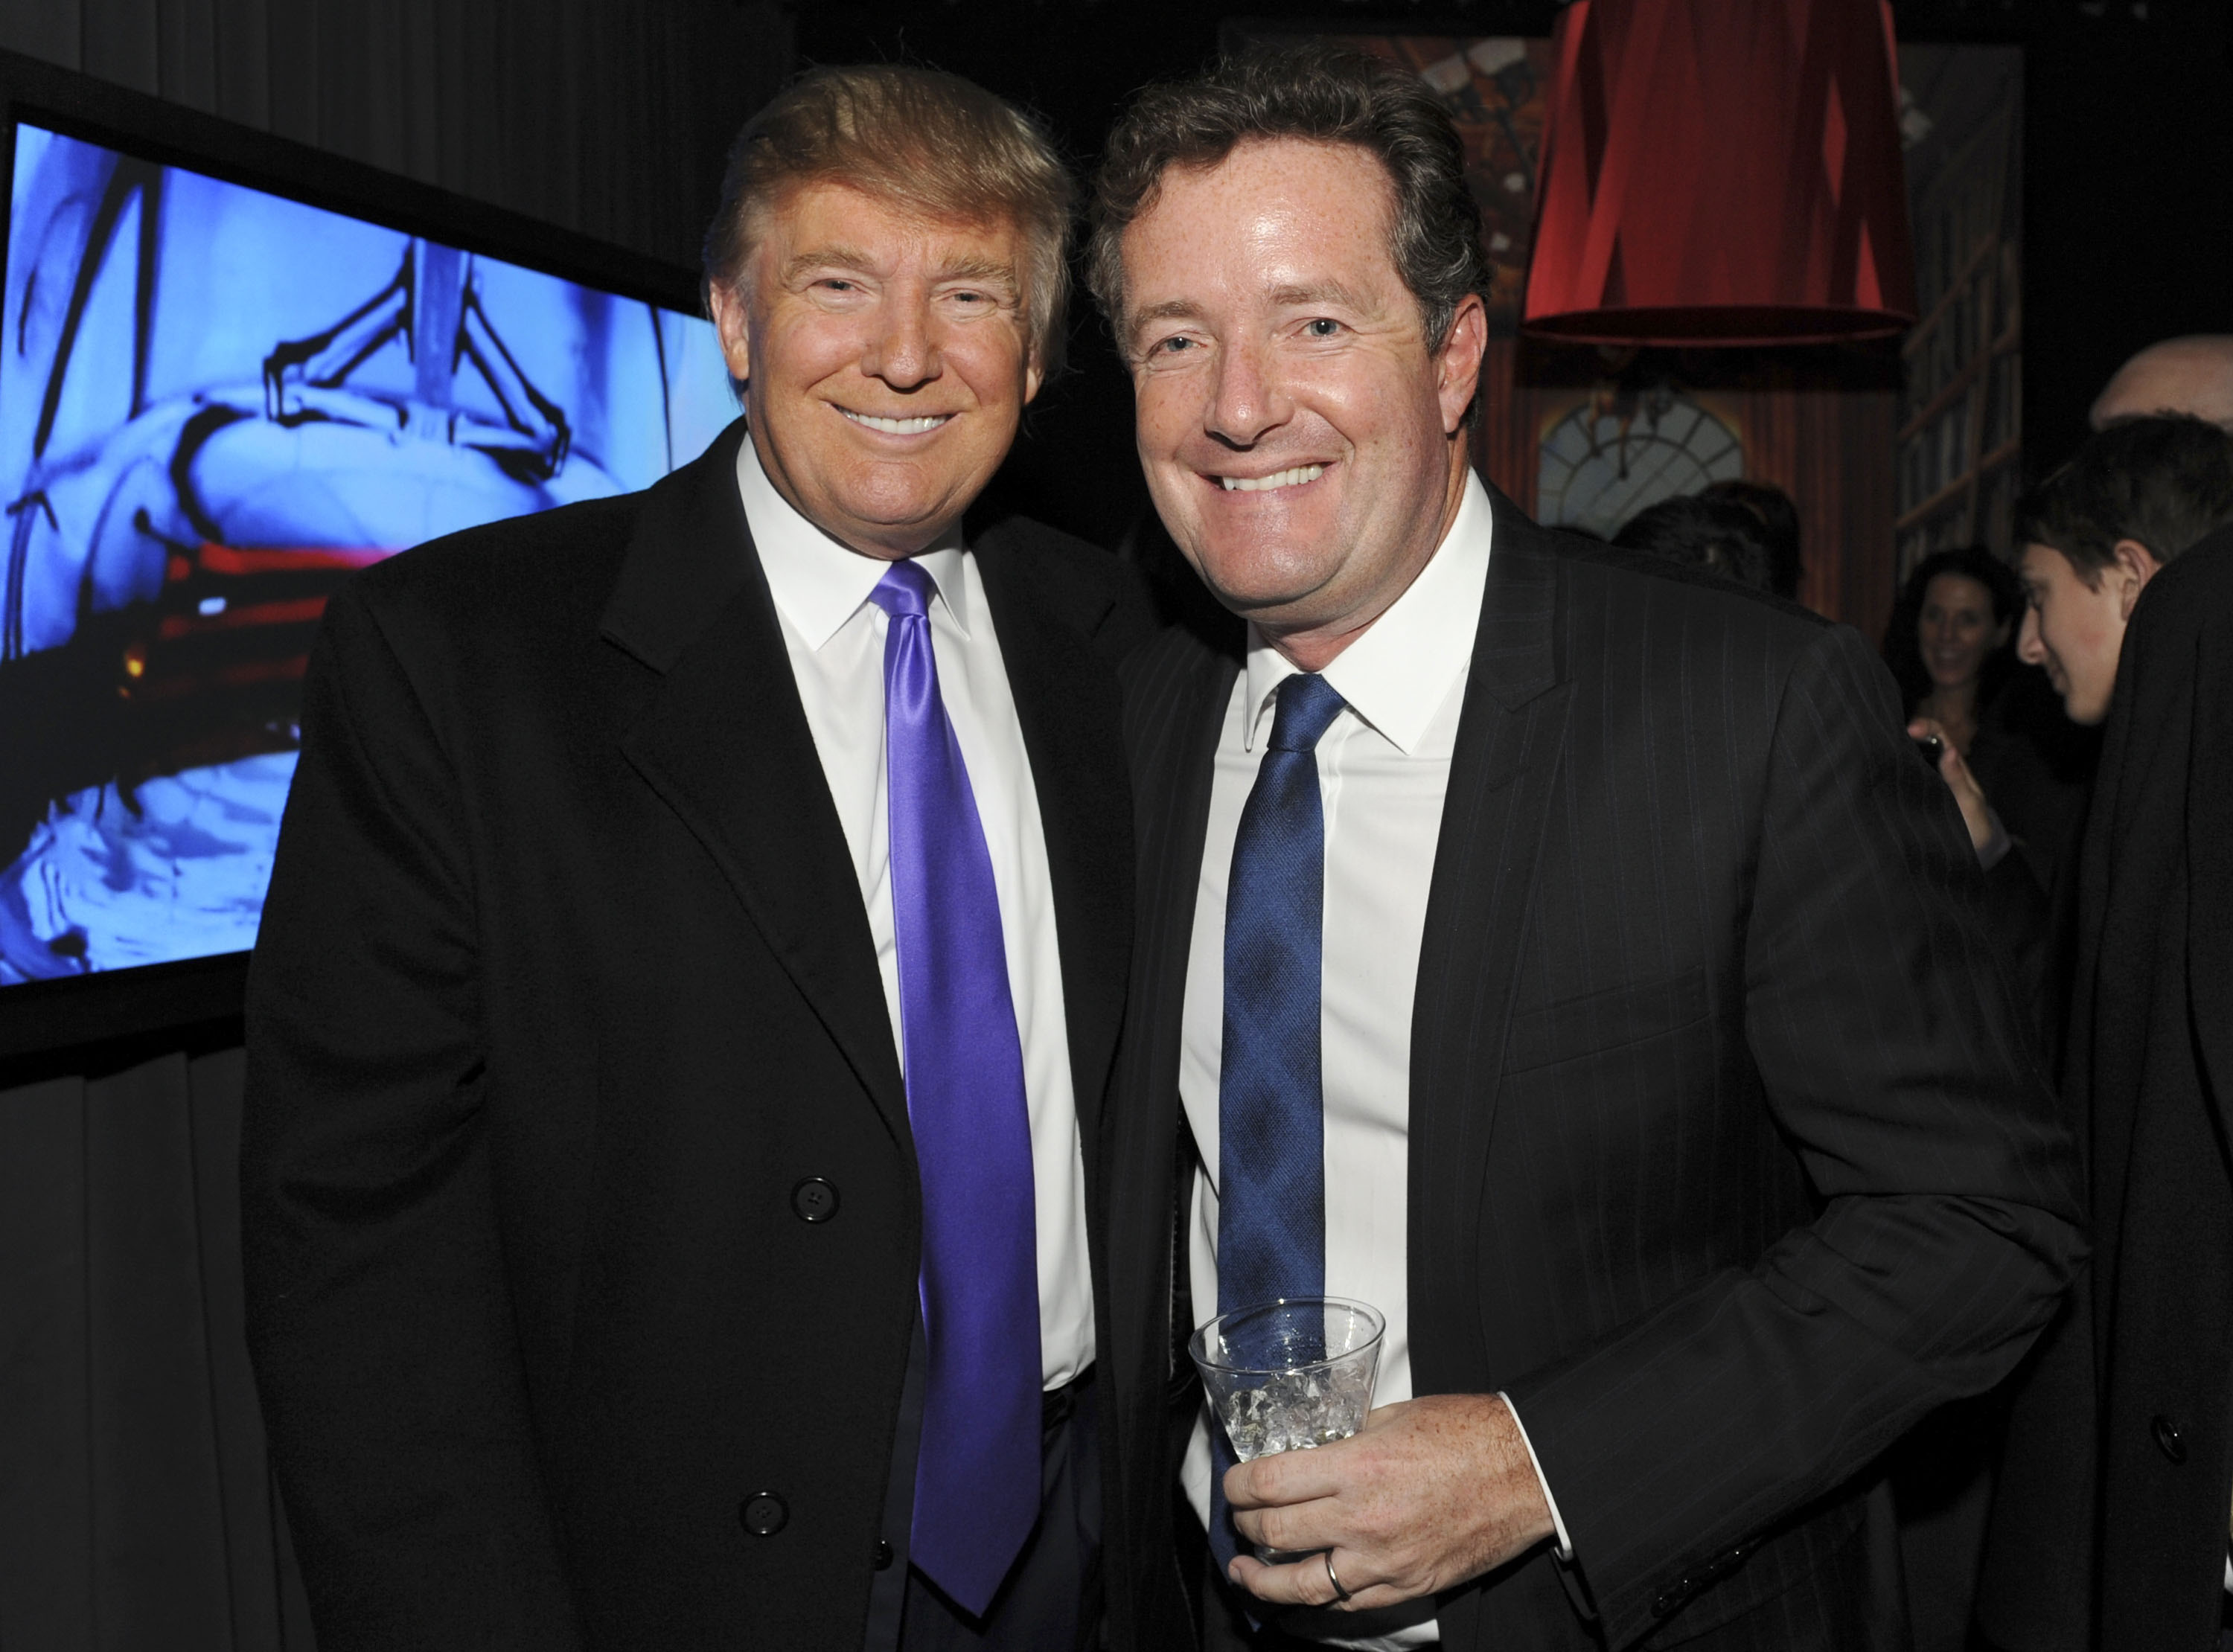 Then-television personality Donald Trump and Piers Morgan attend the celebration of Perfumania and Kim Kardashians appearance on NBCs "The Apprentice" at the Provocateur at The Hotel Gansevoort on November 10, 2010 in New York, New York.  (Photo by Mathew Imaging/WireImage)